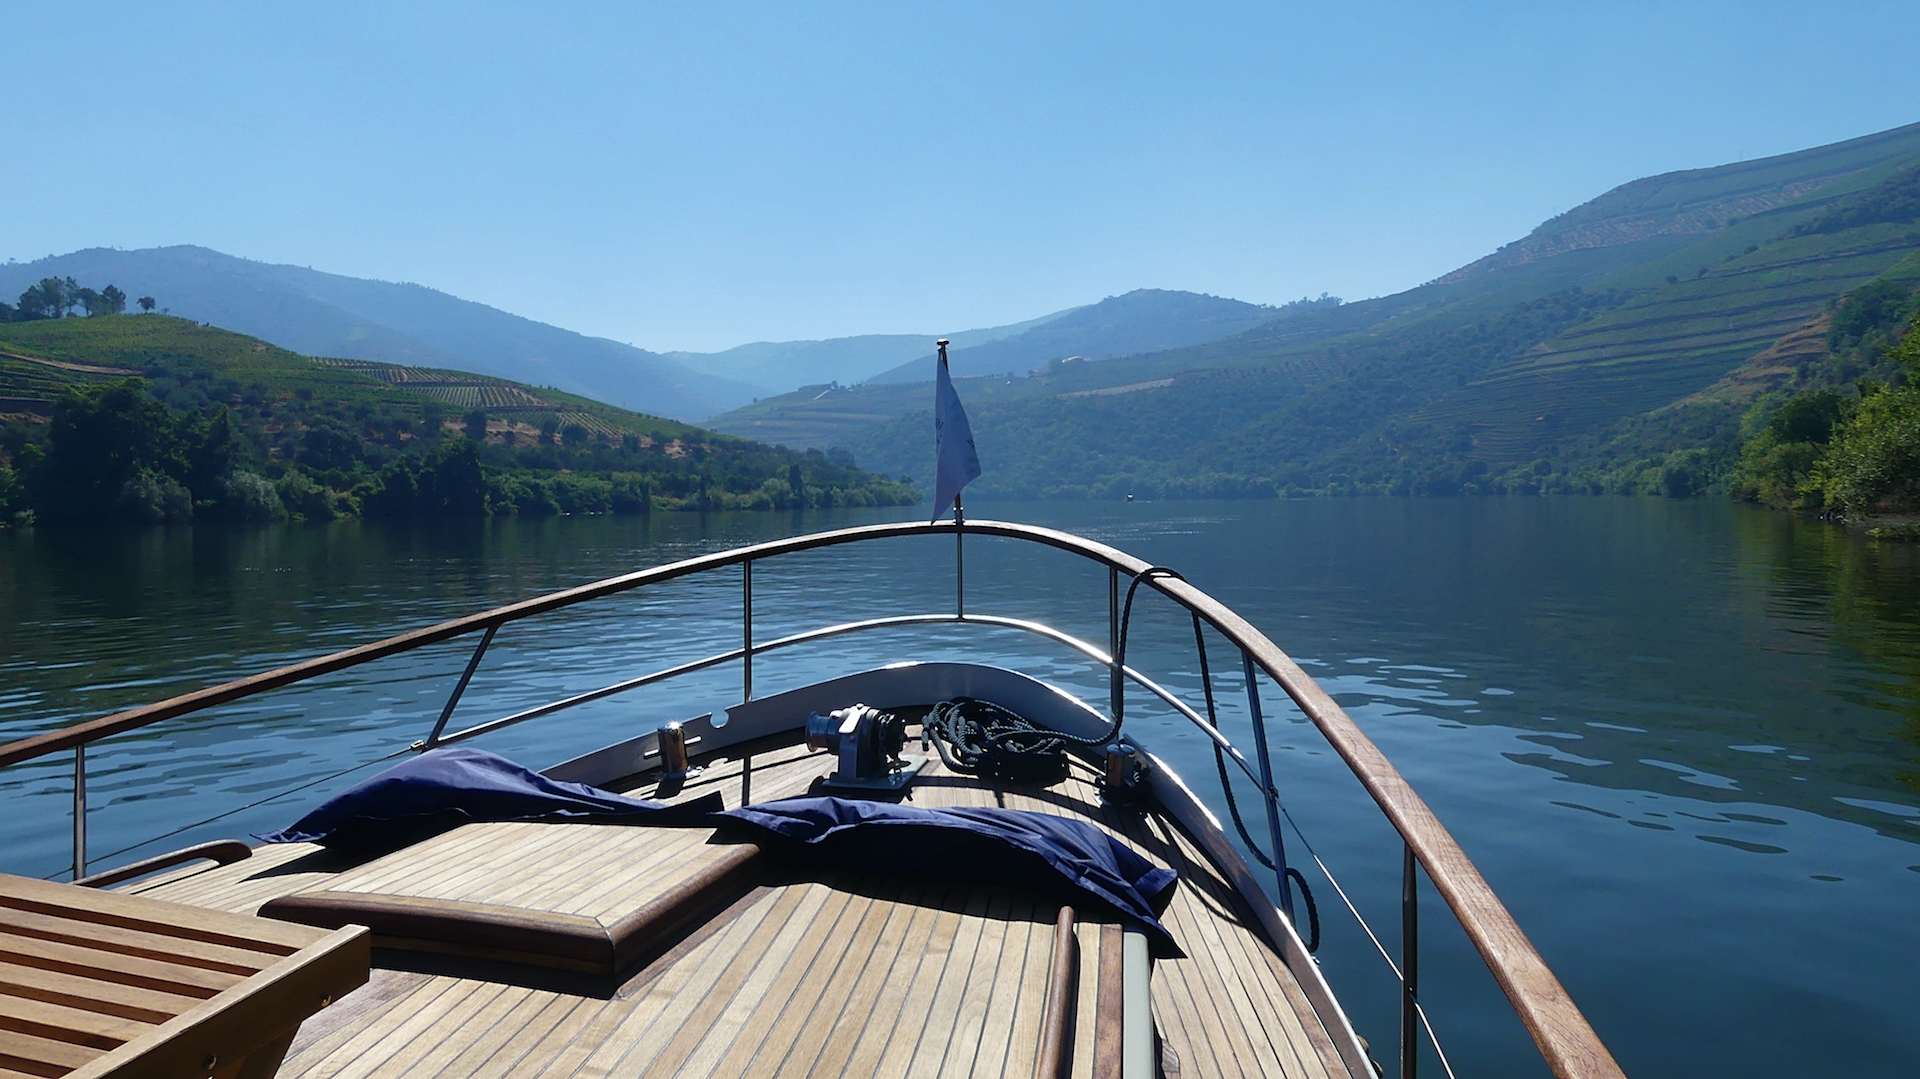 Explore the region of the Douro Valley on a boat